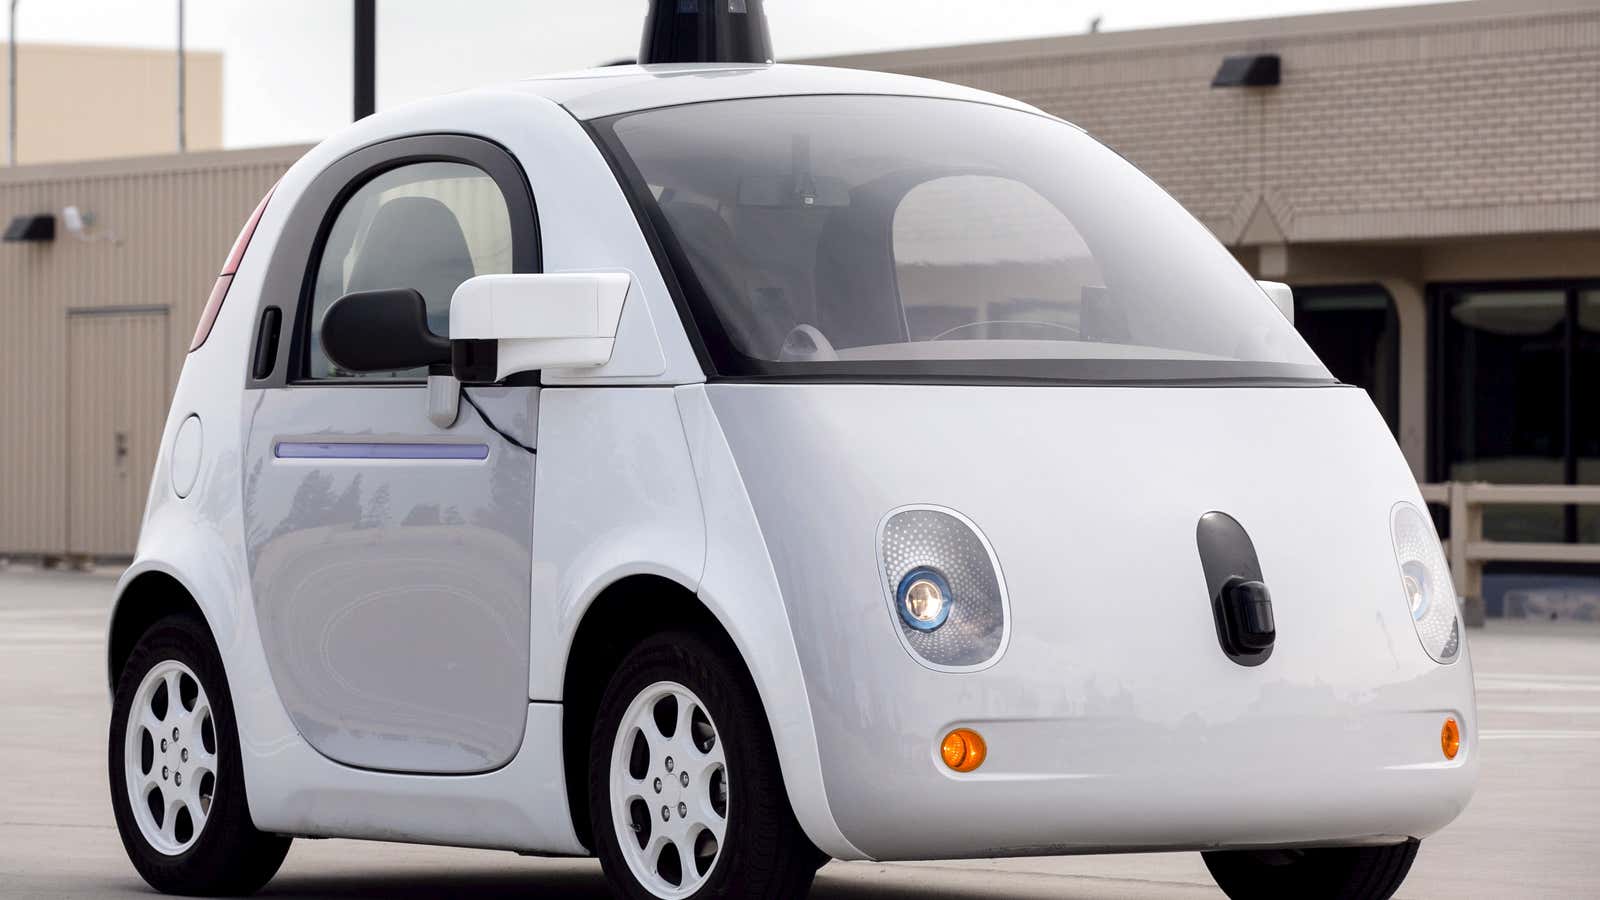 A prototype of Googles self-driving car in 2015.